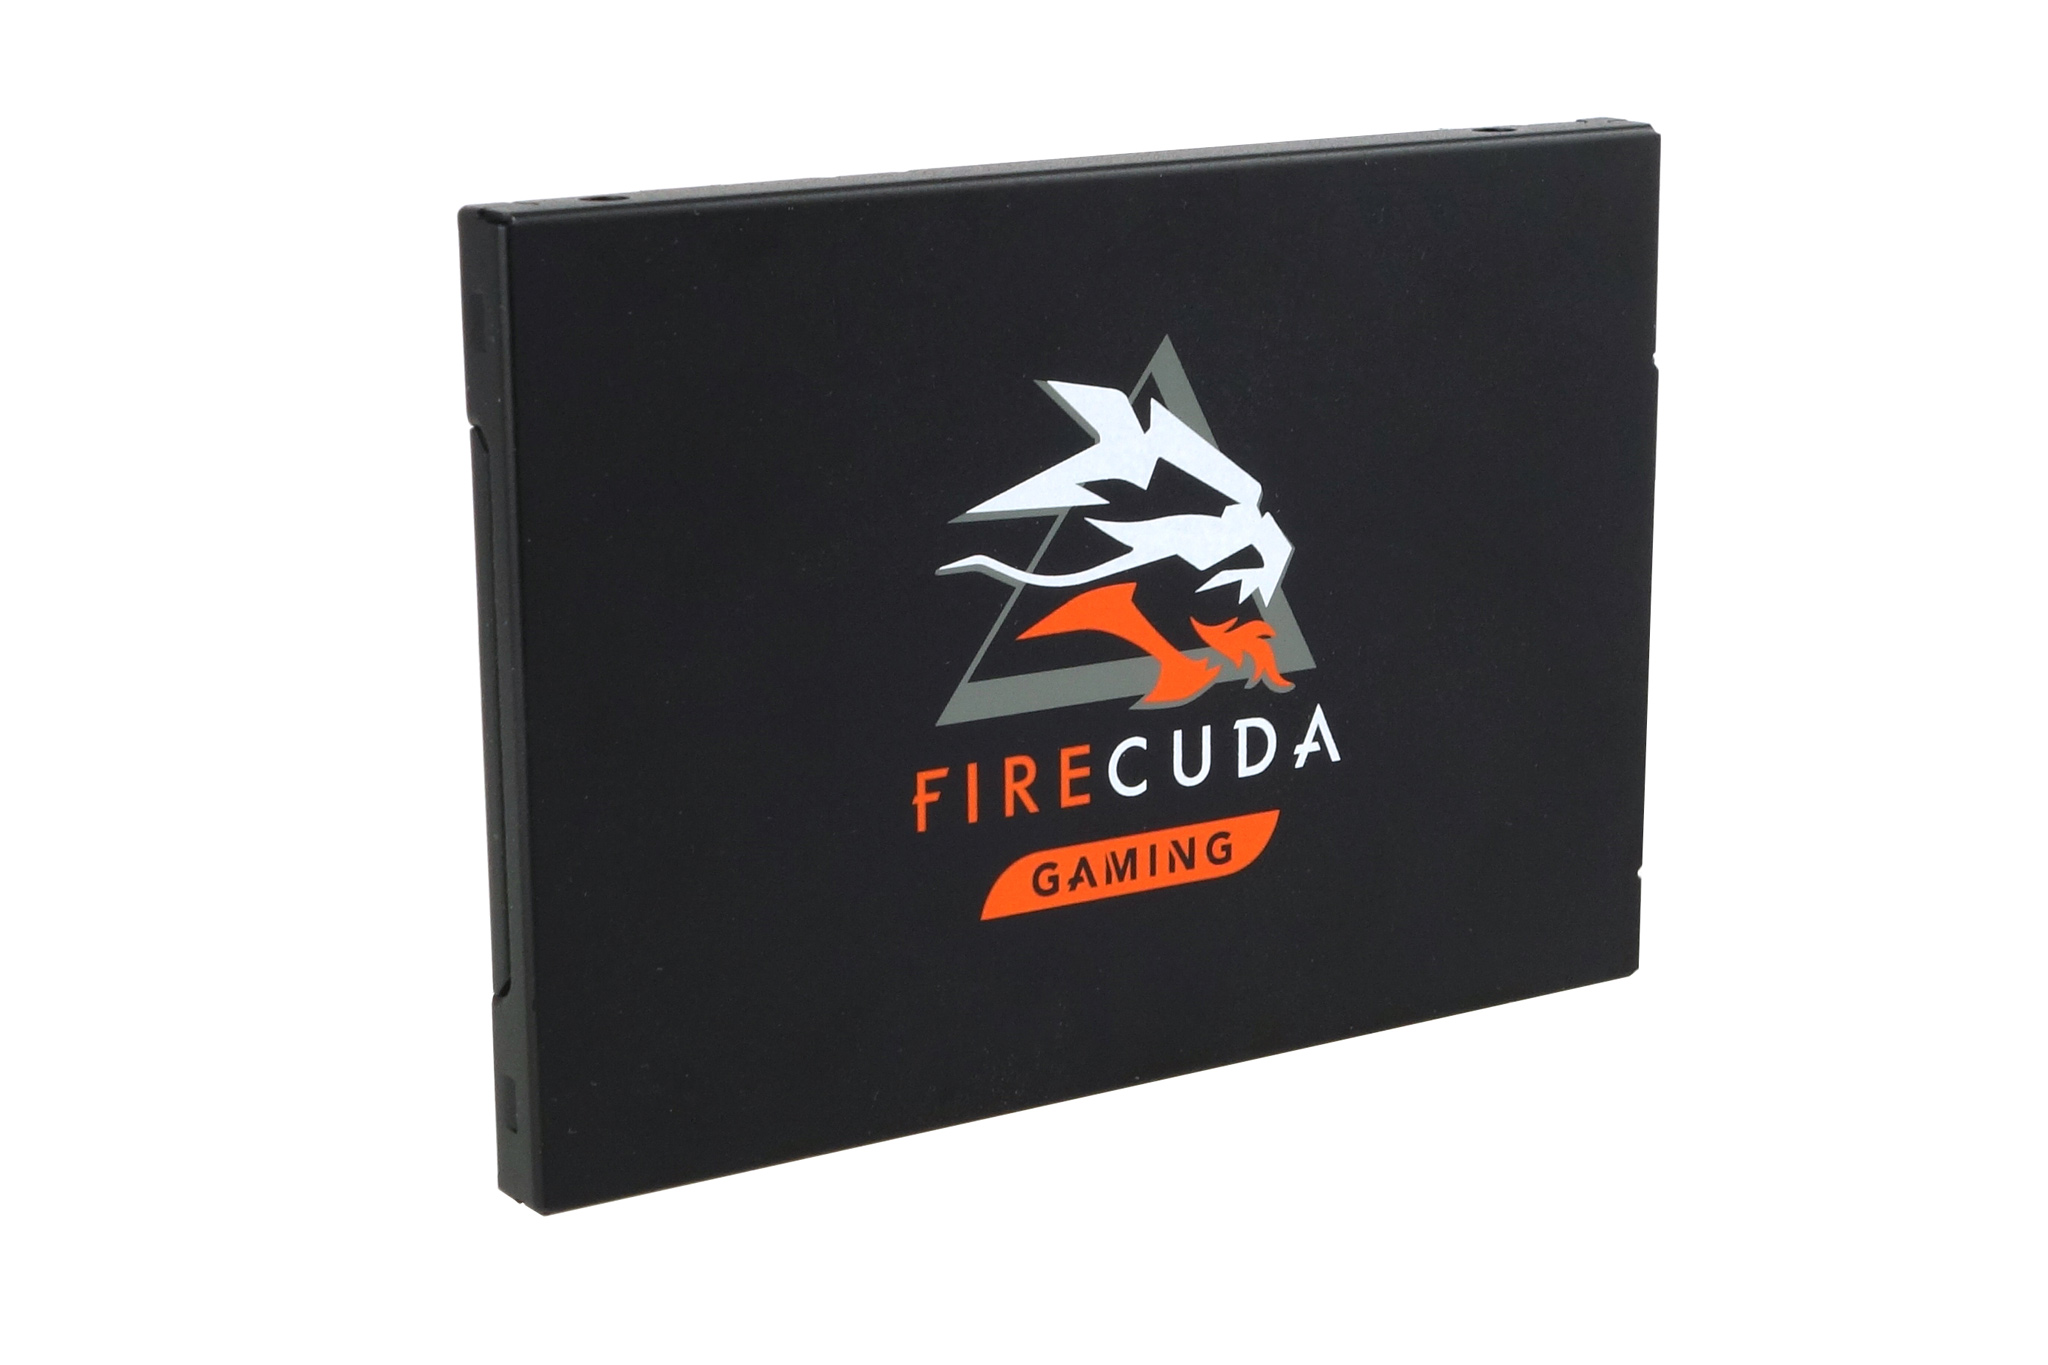 Seagate FireCuda 120 SSD Review 